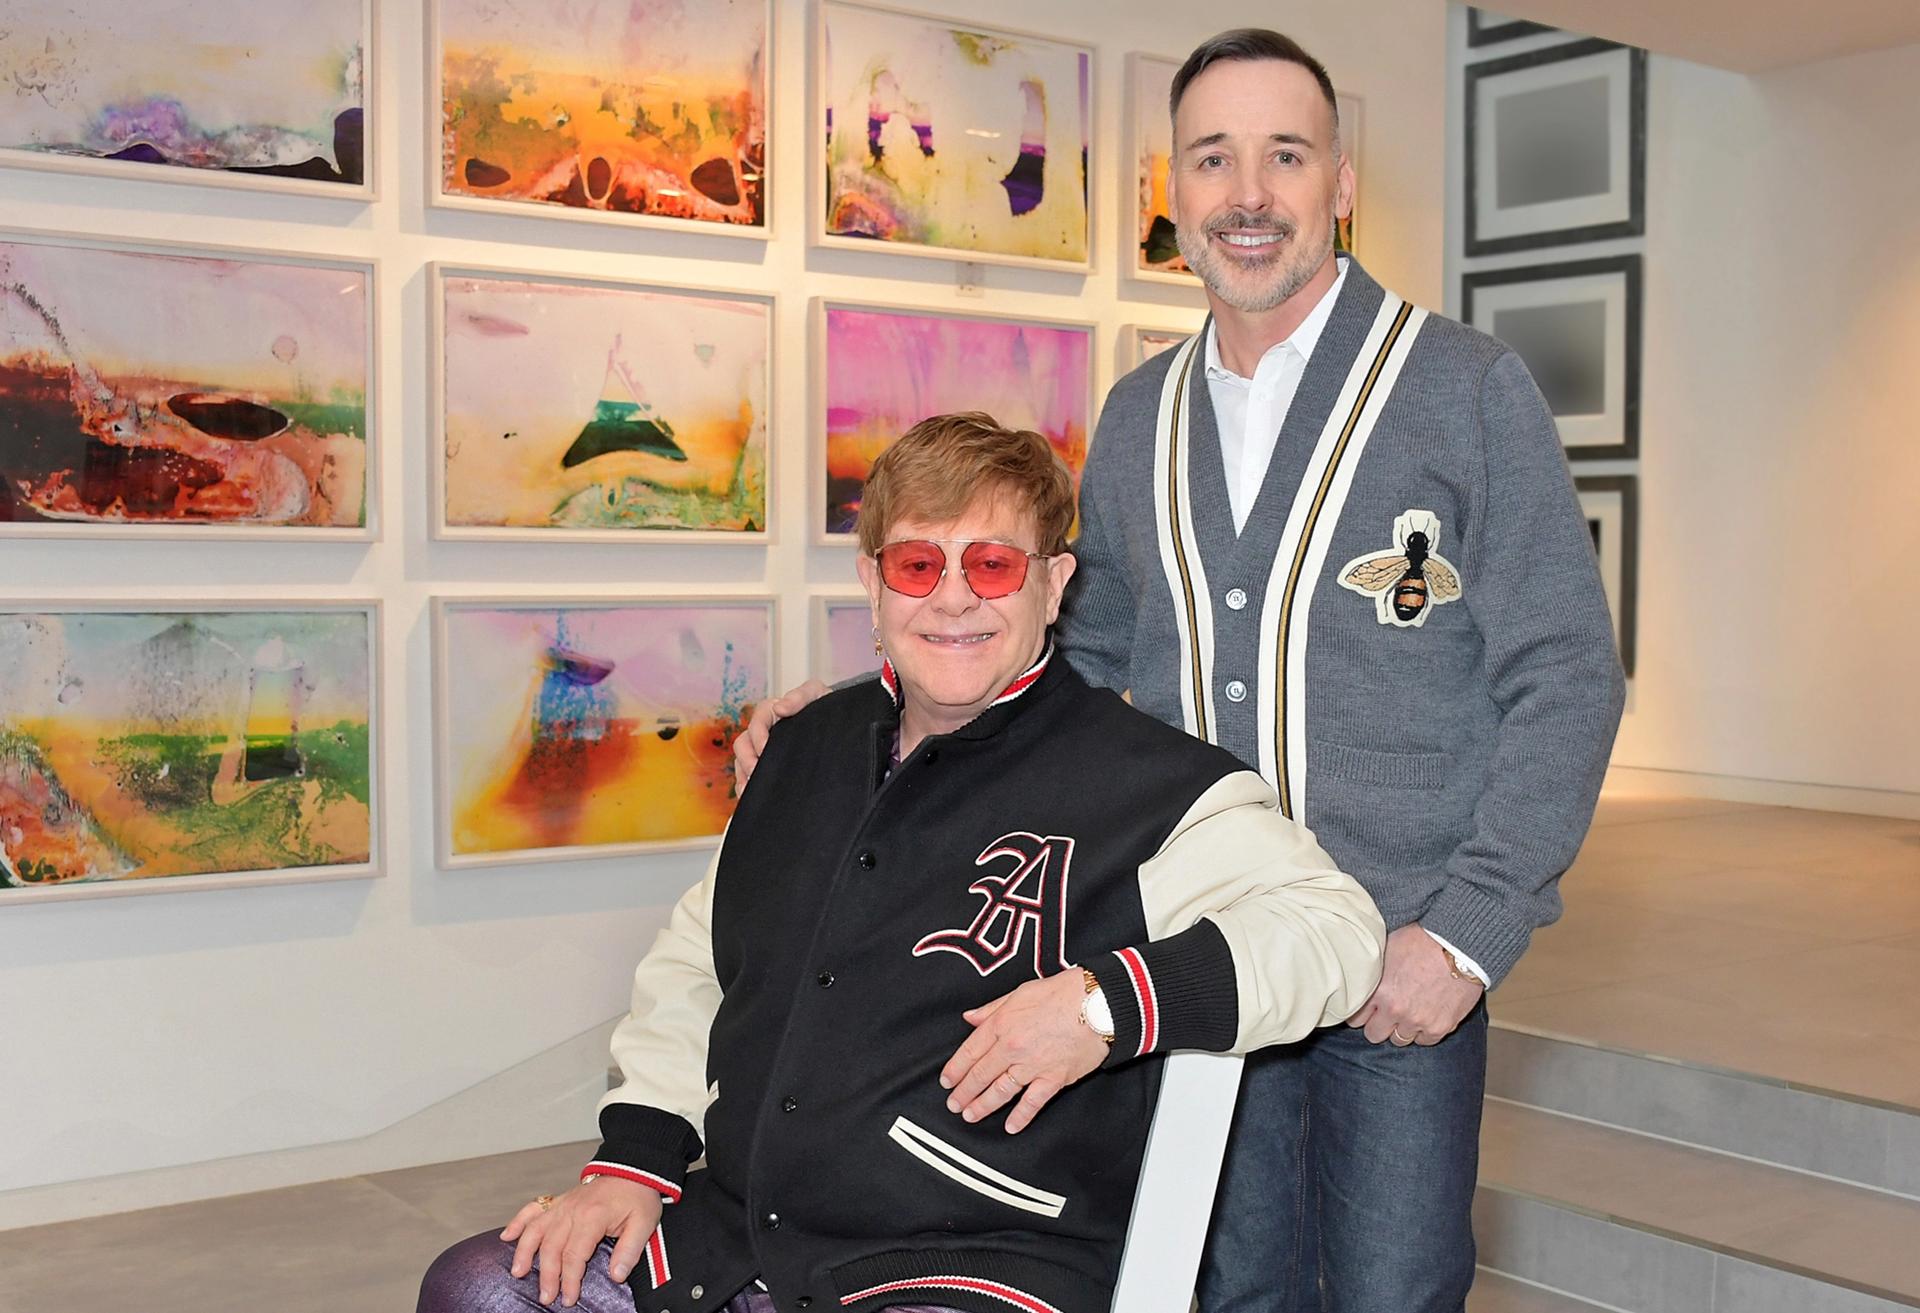 Elton John and David Furnish in the gallery named after them © Dave Benett Getty Images for the V&A